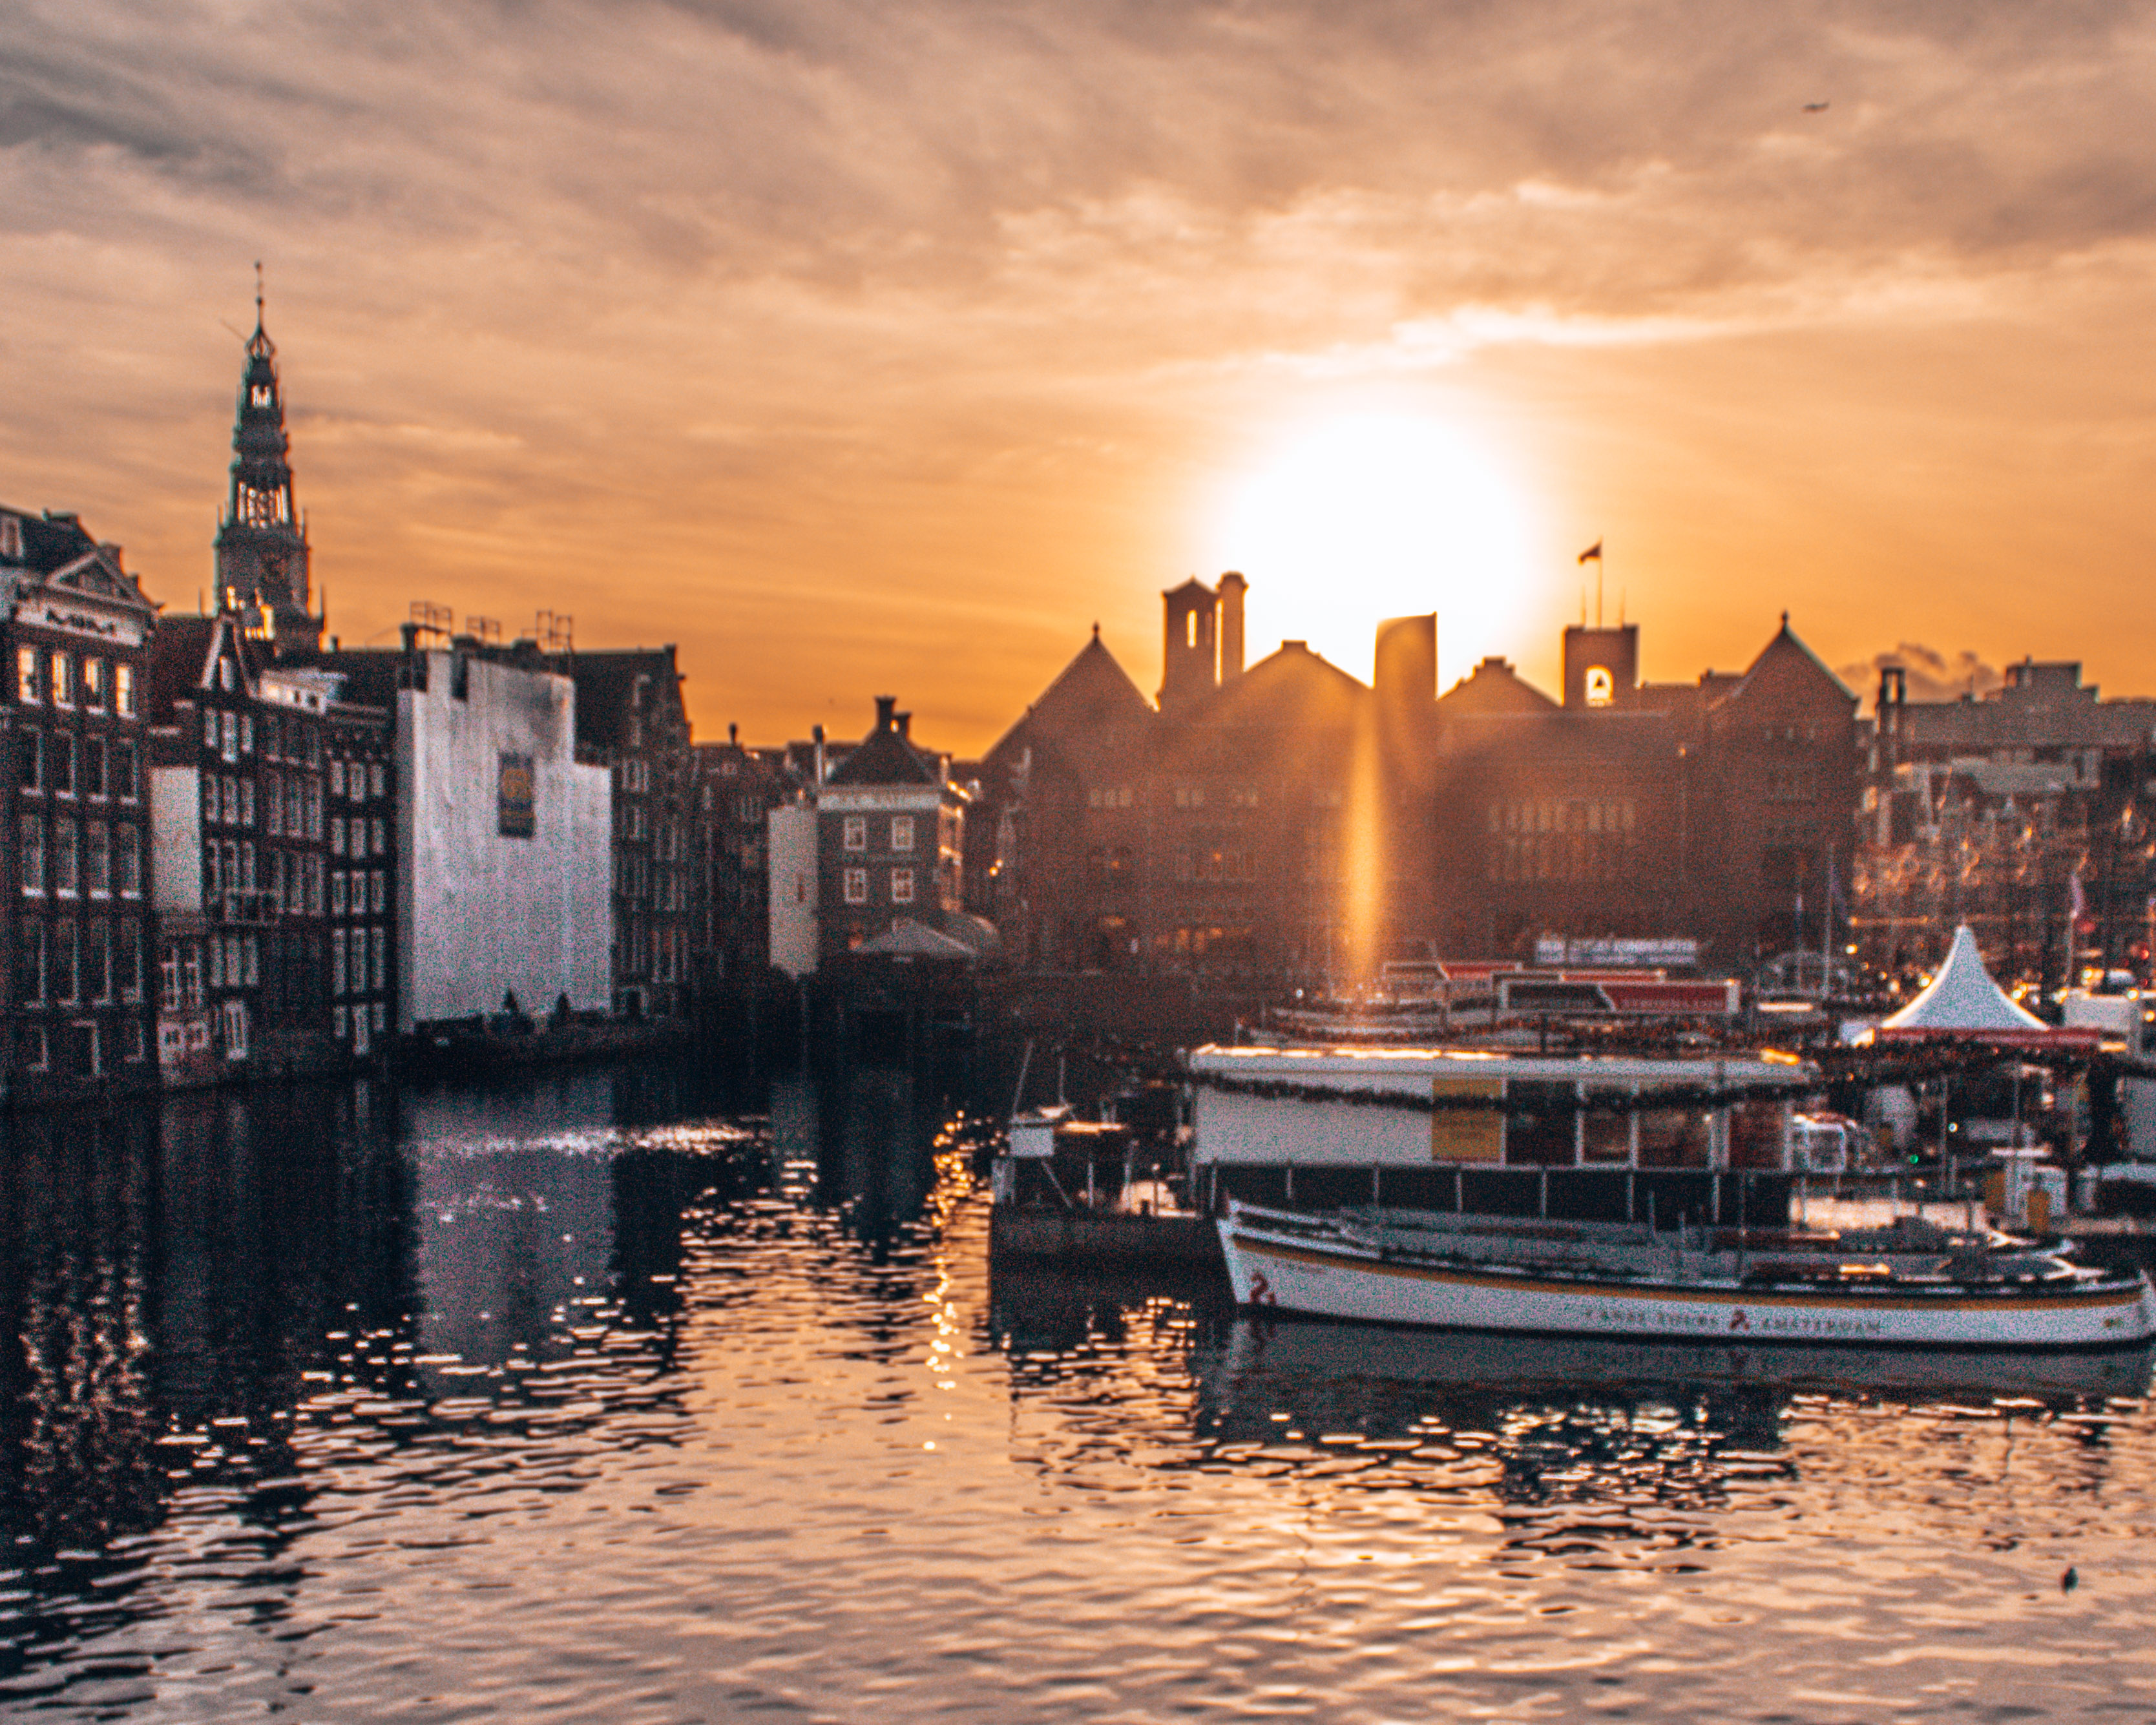 A great sunset over the canals of Amsterdam, Netherlands